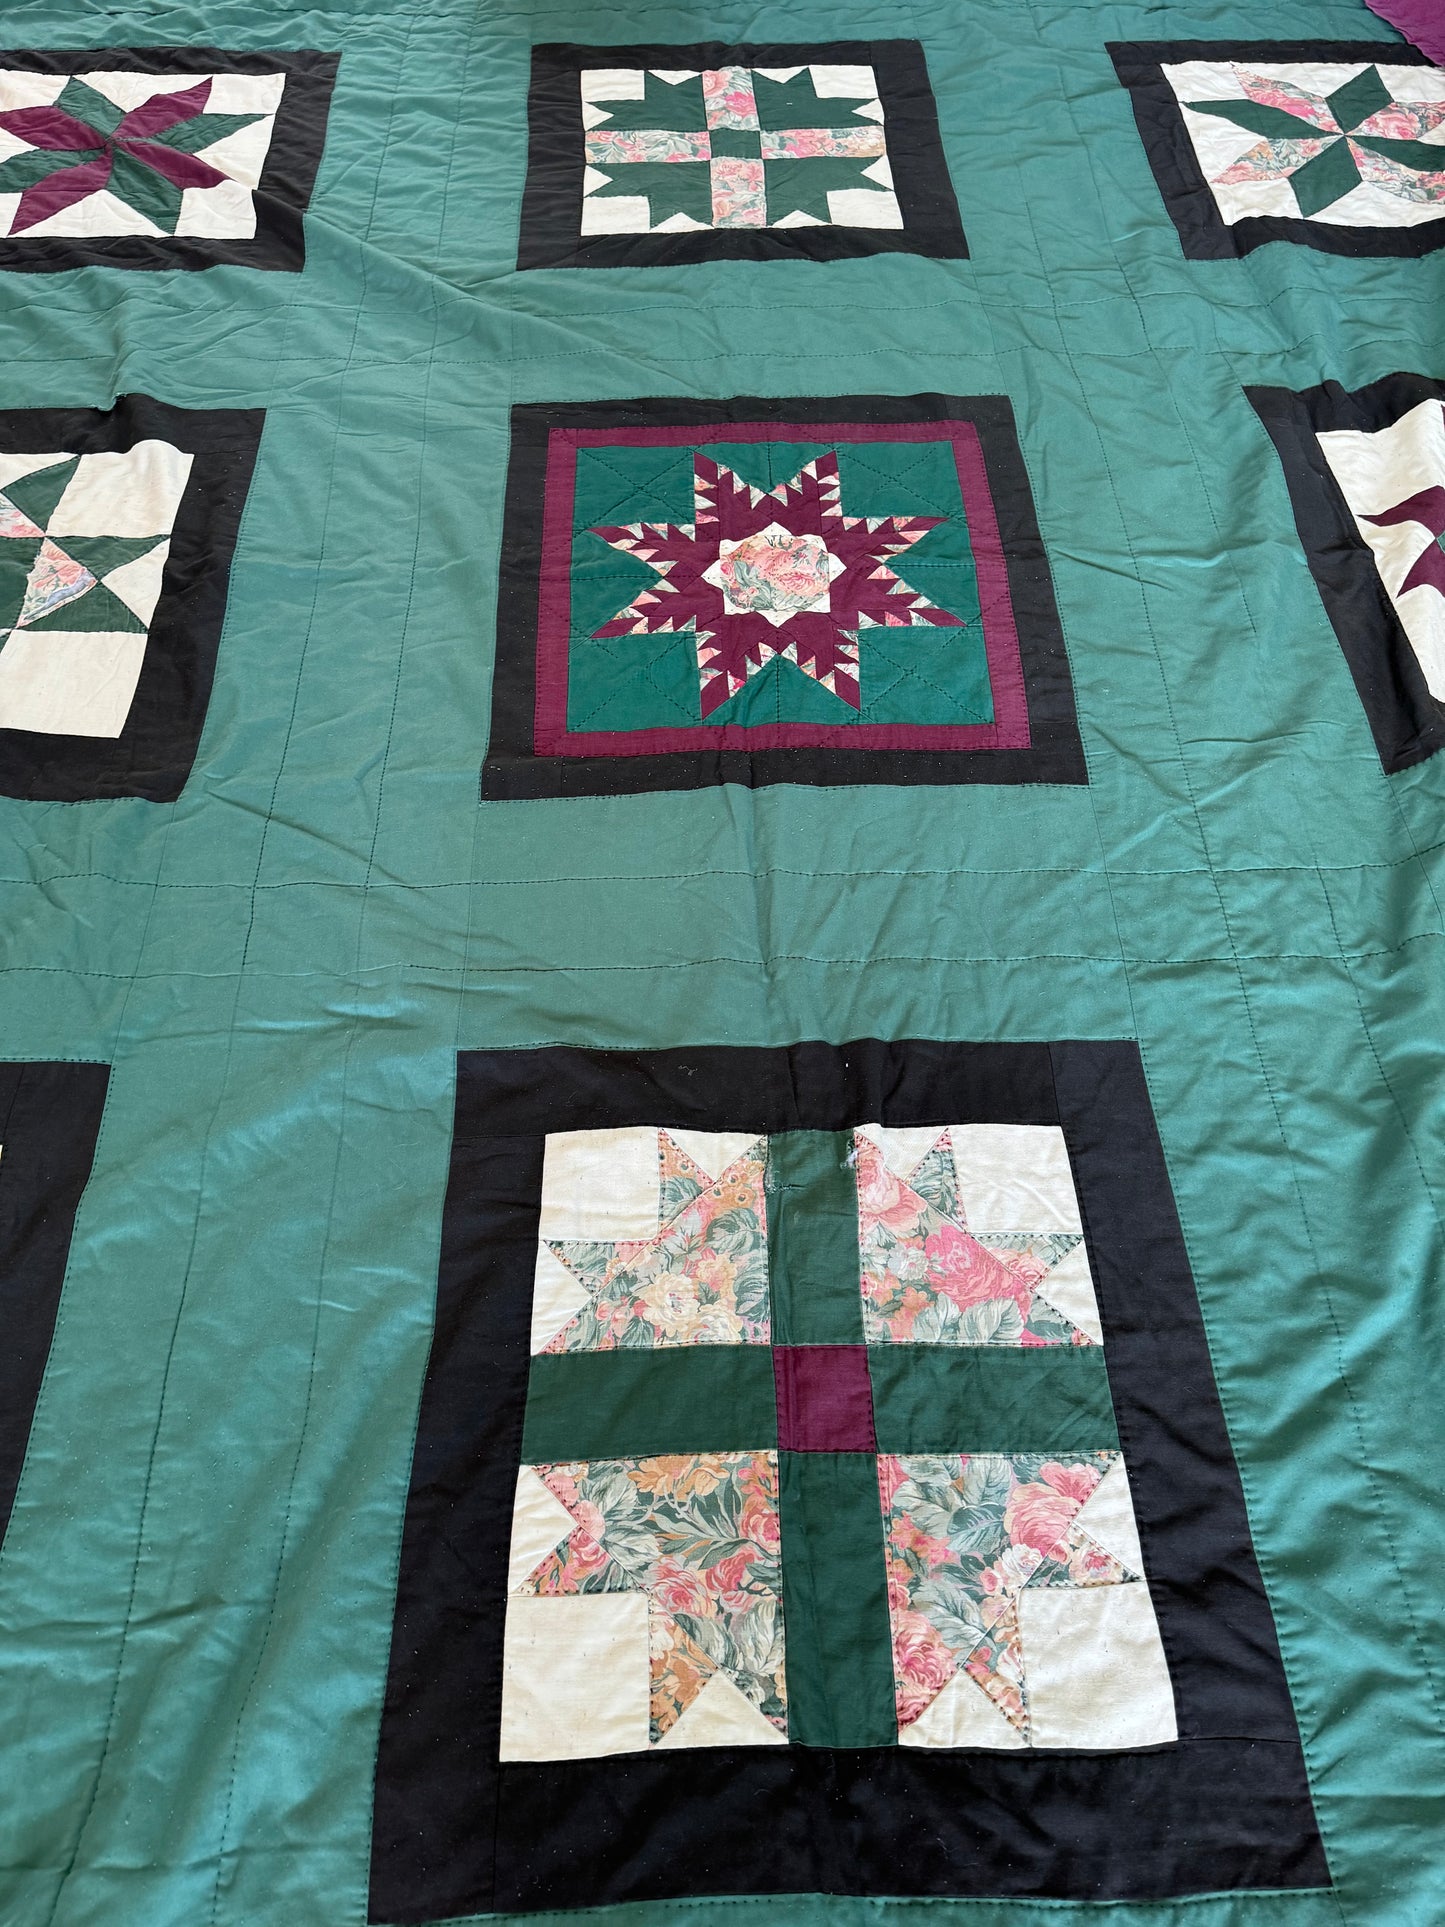 King Size Hand Sewn Homemade Quilt